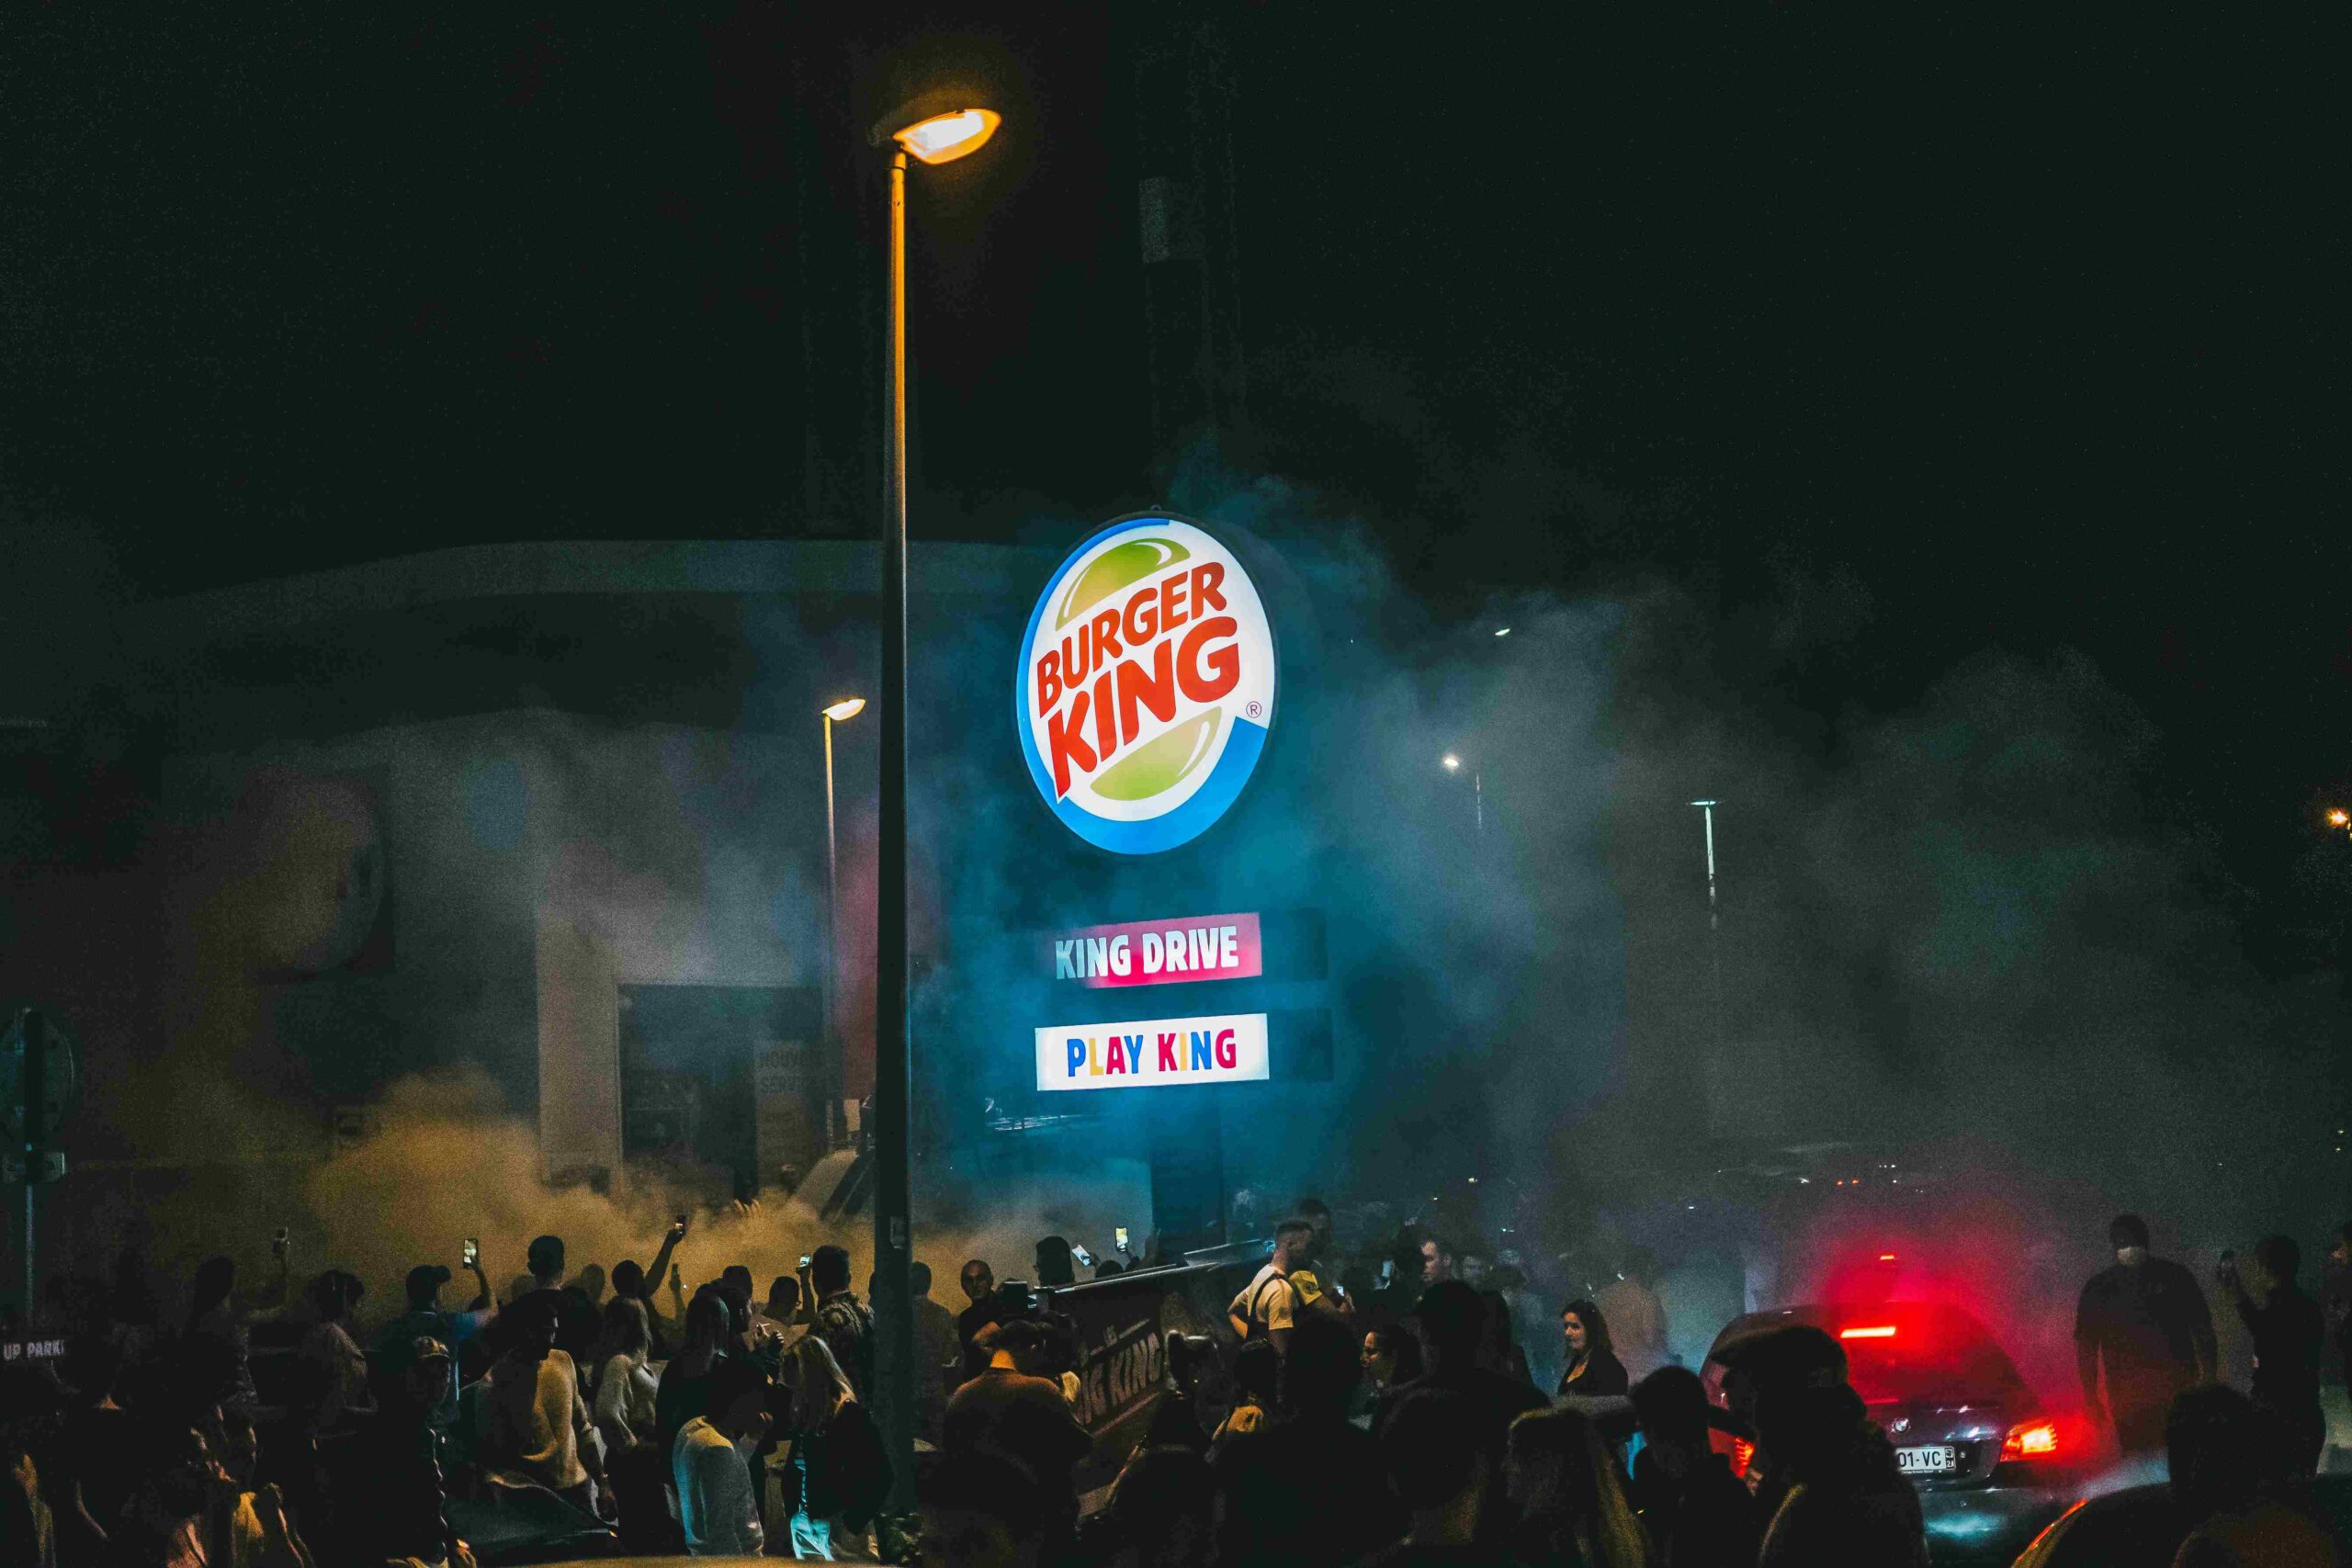 Burger King Finland successfully hosts the “Rave Of Love” event